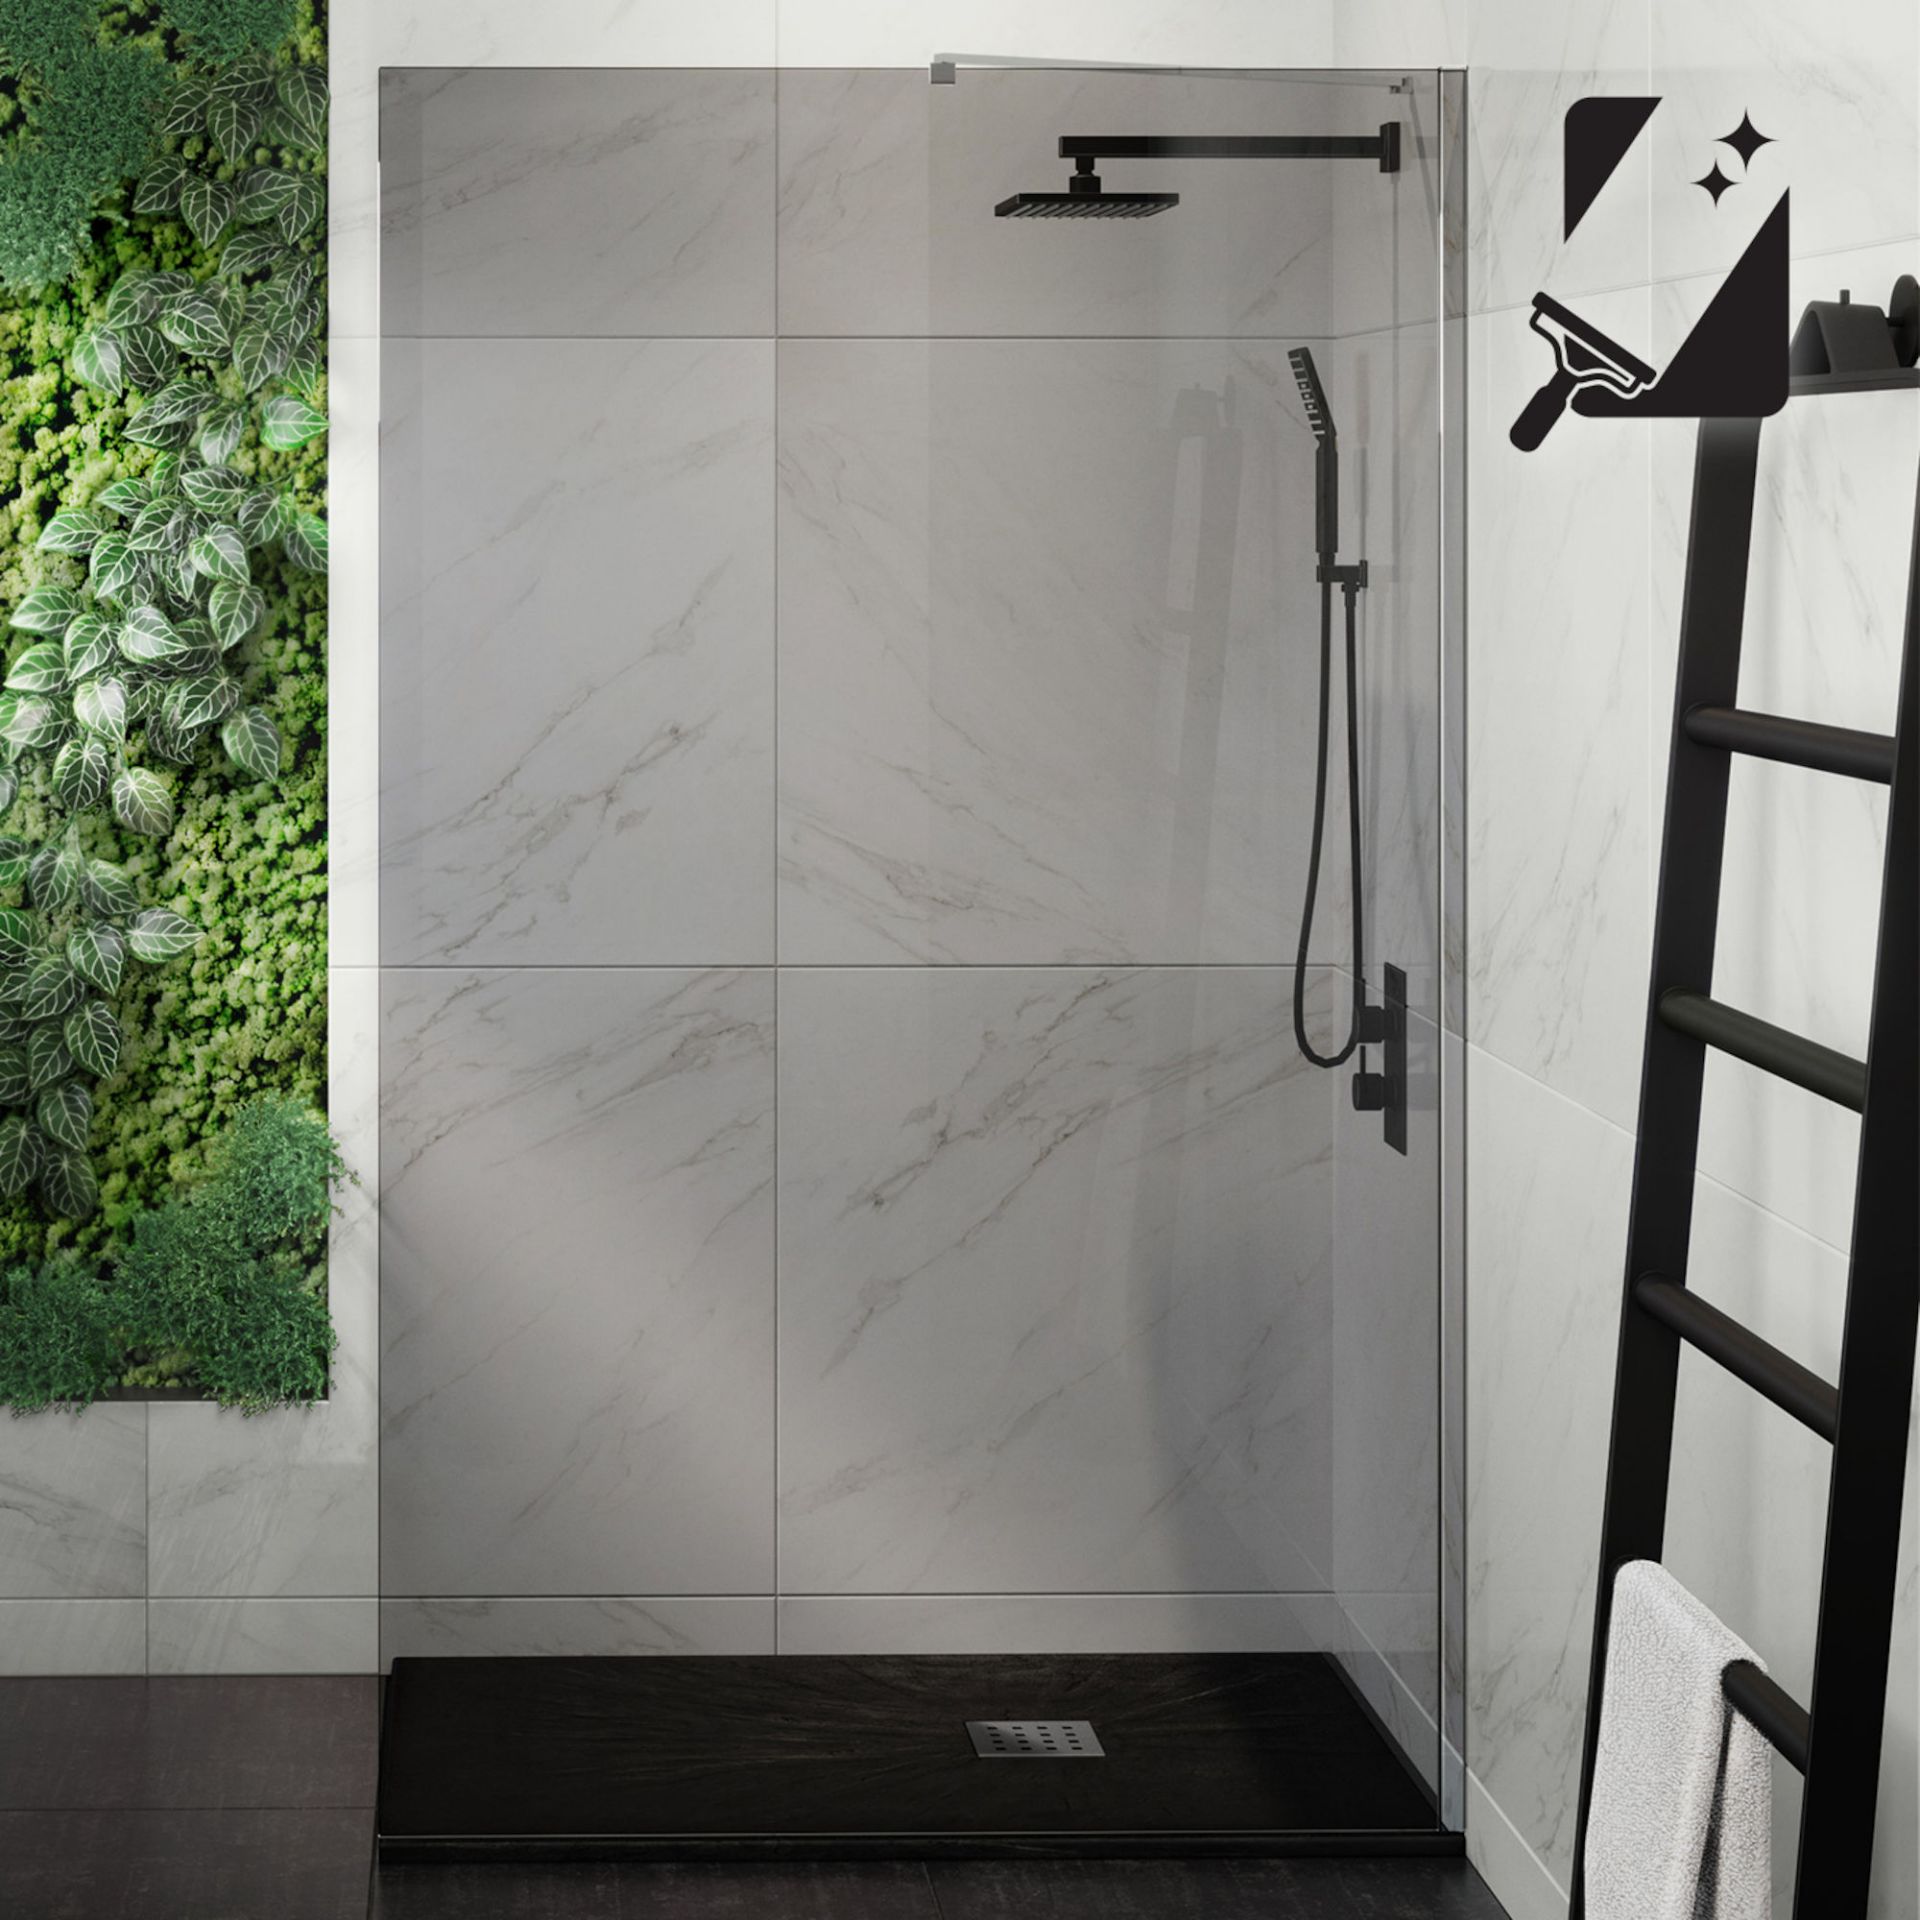 (JL10) 900mm - 8mm Designer EasyClean Smoked Glass Wetroom Panel. RRP £399.99. Stylish smoked ...